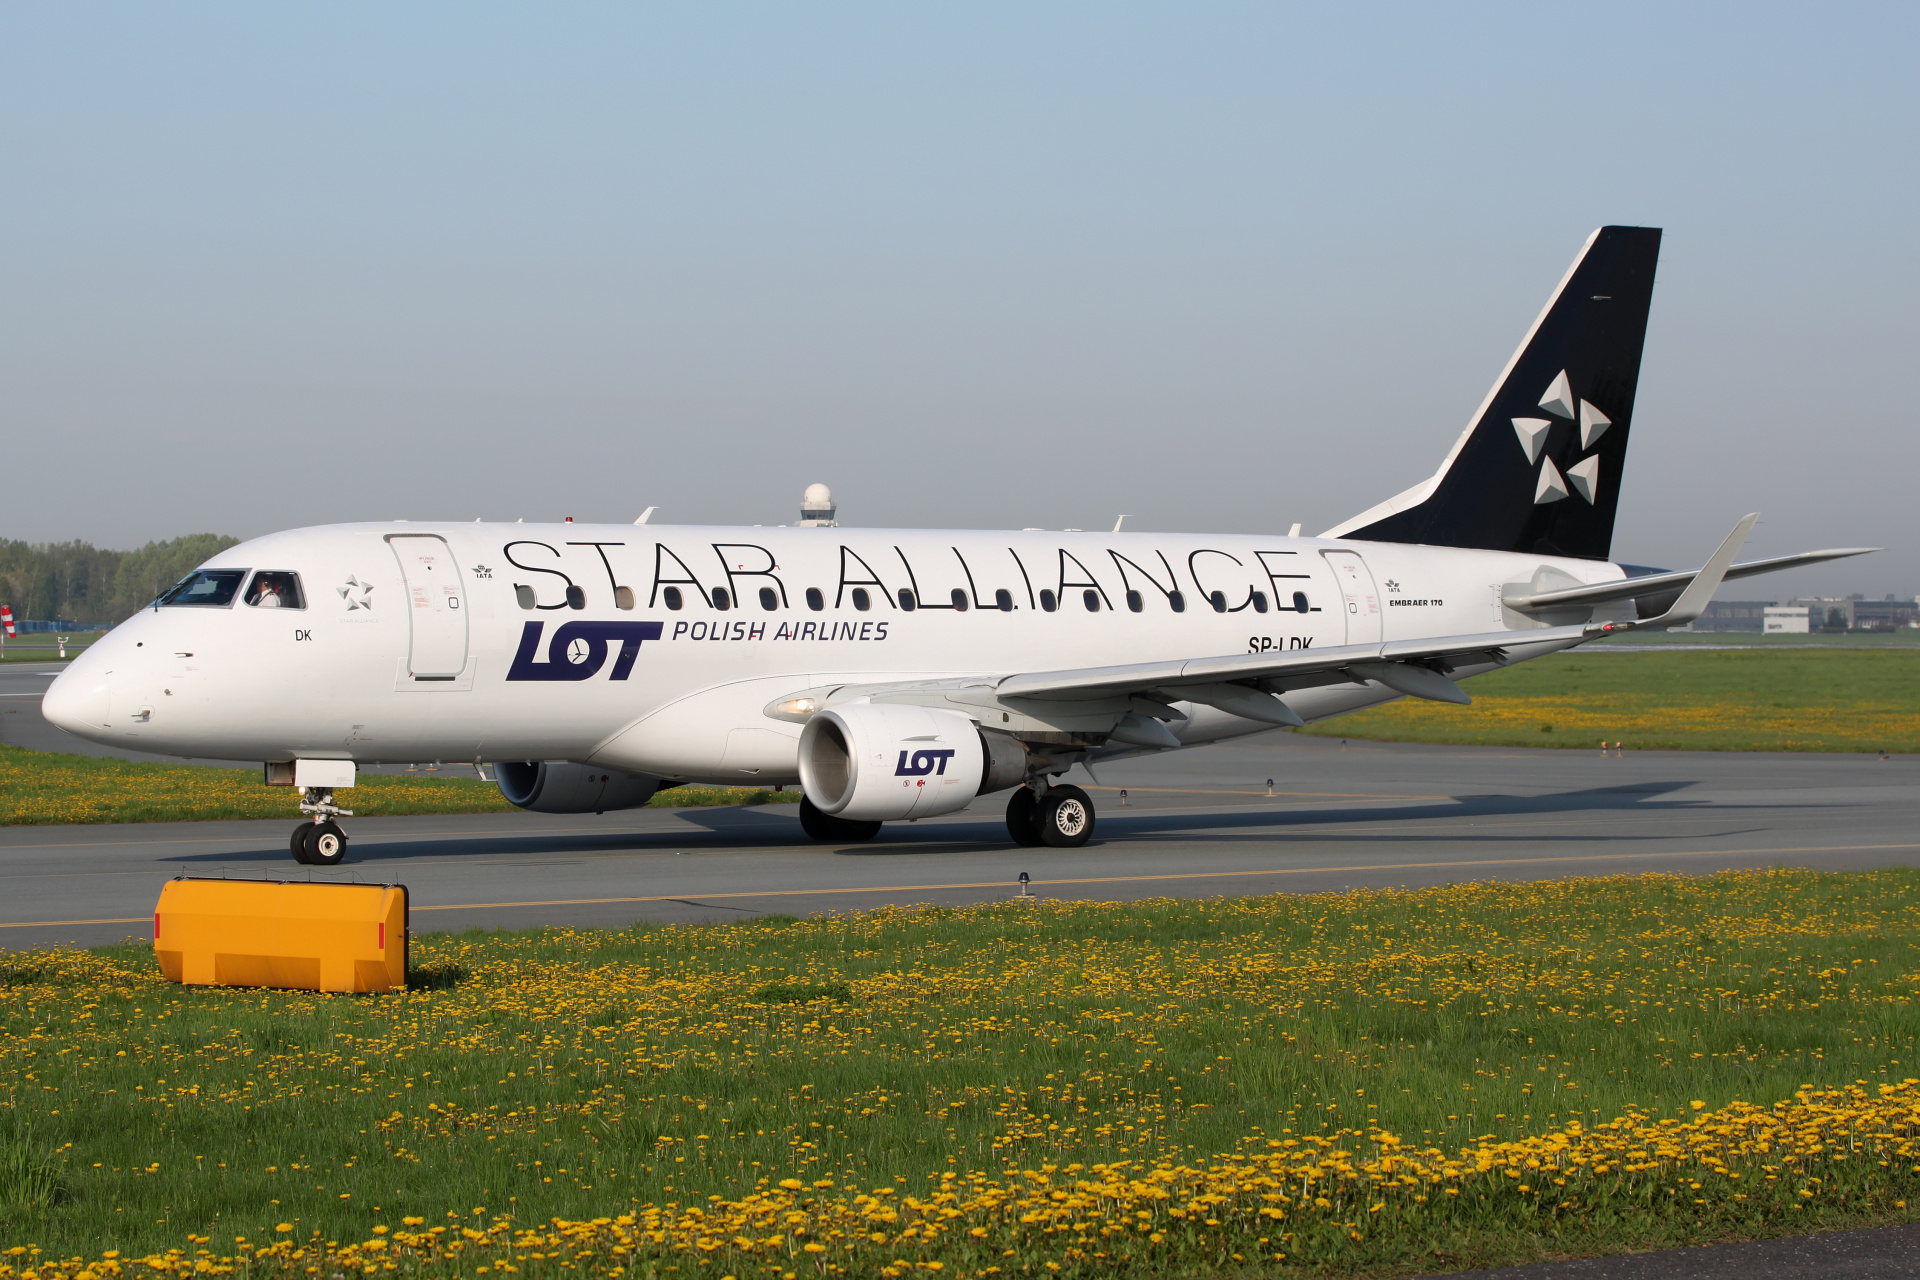 SP-LDK (Star Alliance livery) (Aircraft » EPWA Spotting » Embraer E170 » LOT Polish Airlines)